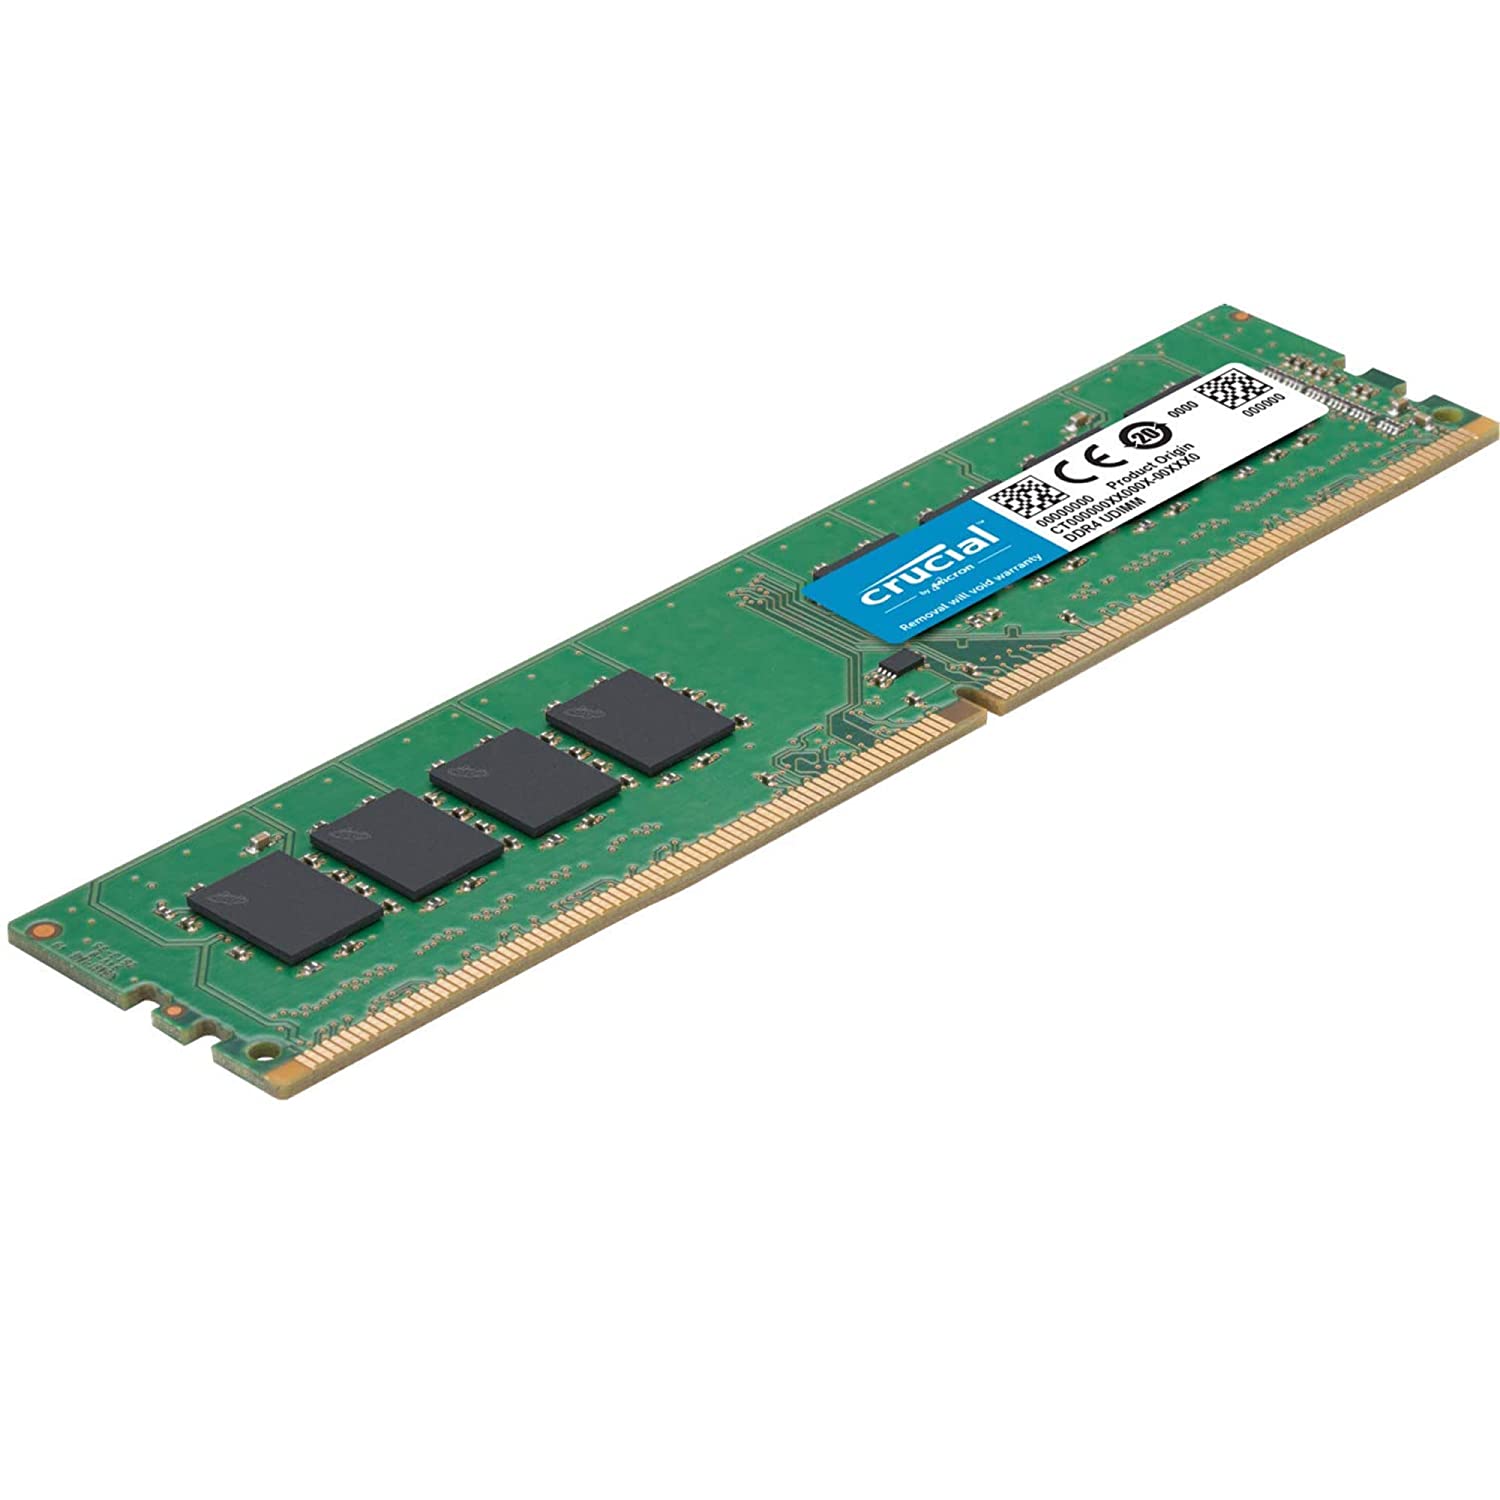 Memory for computers in Qatar